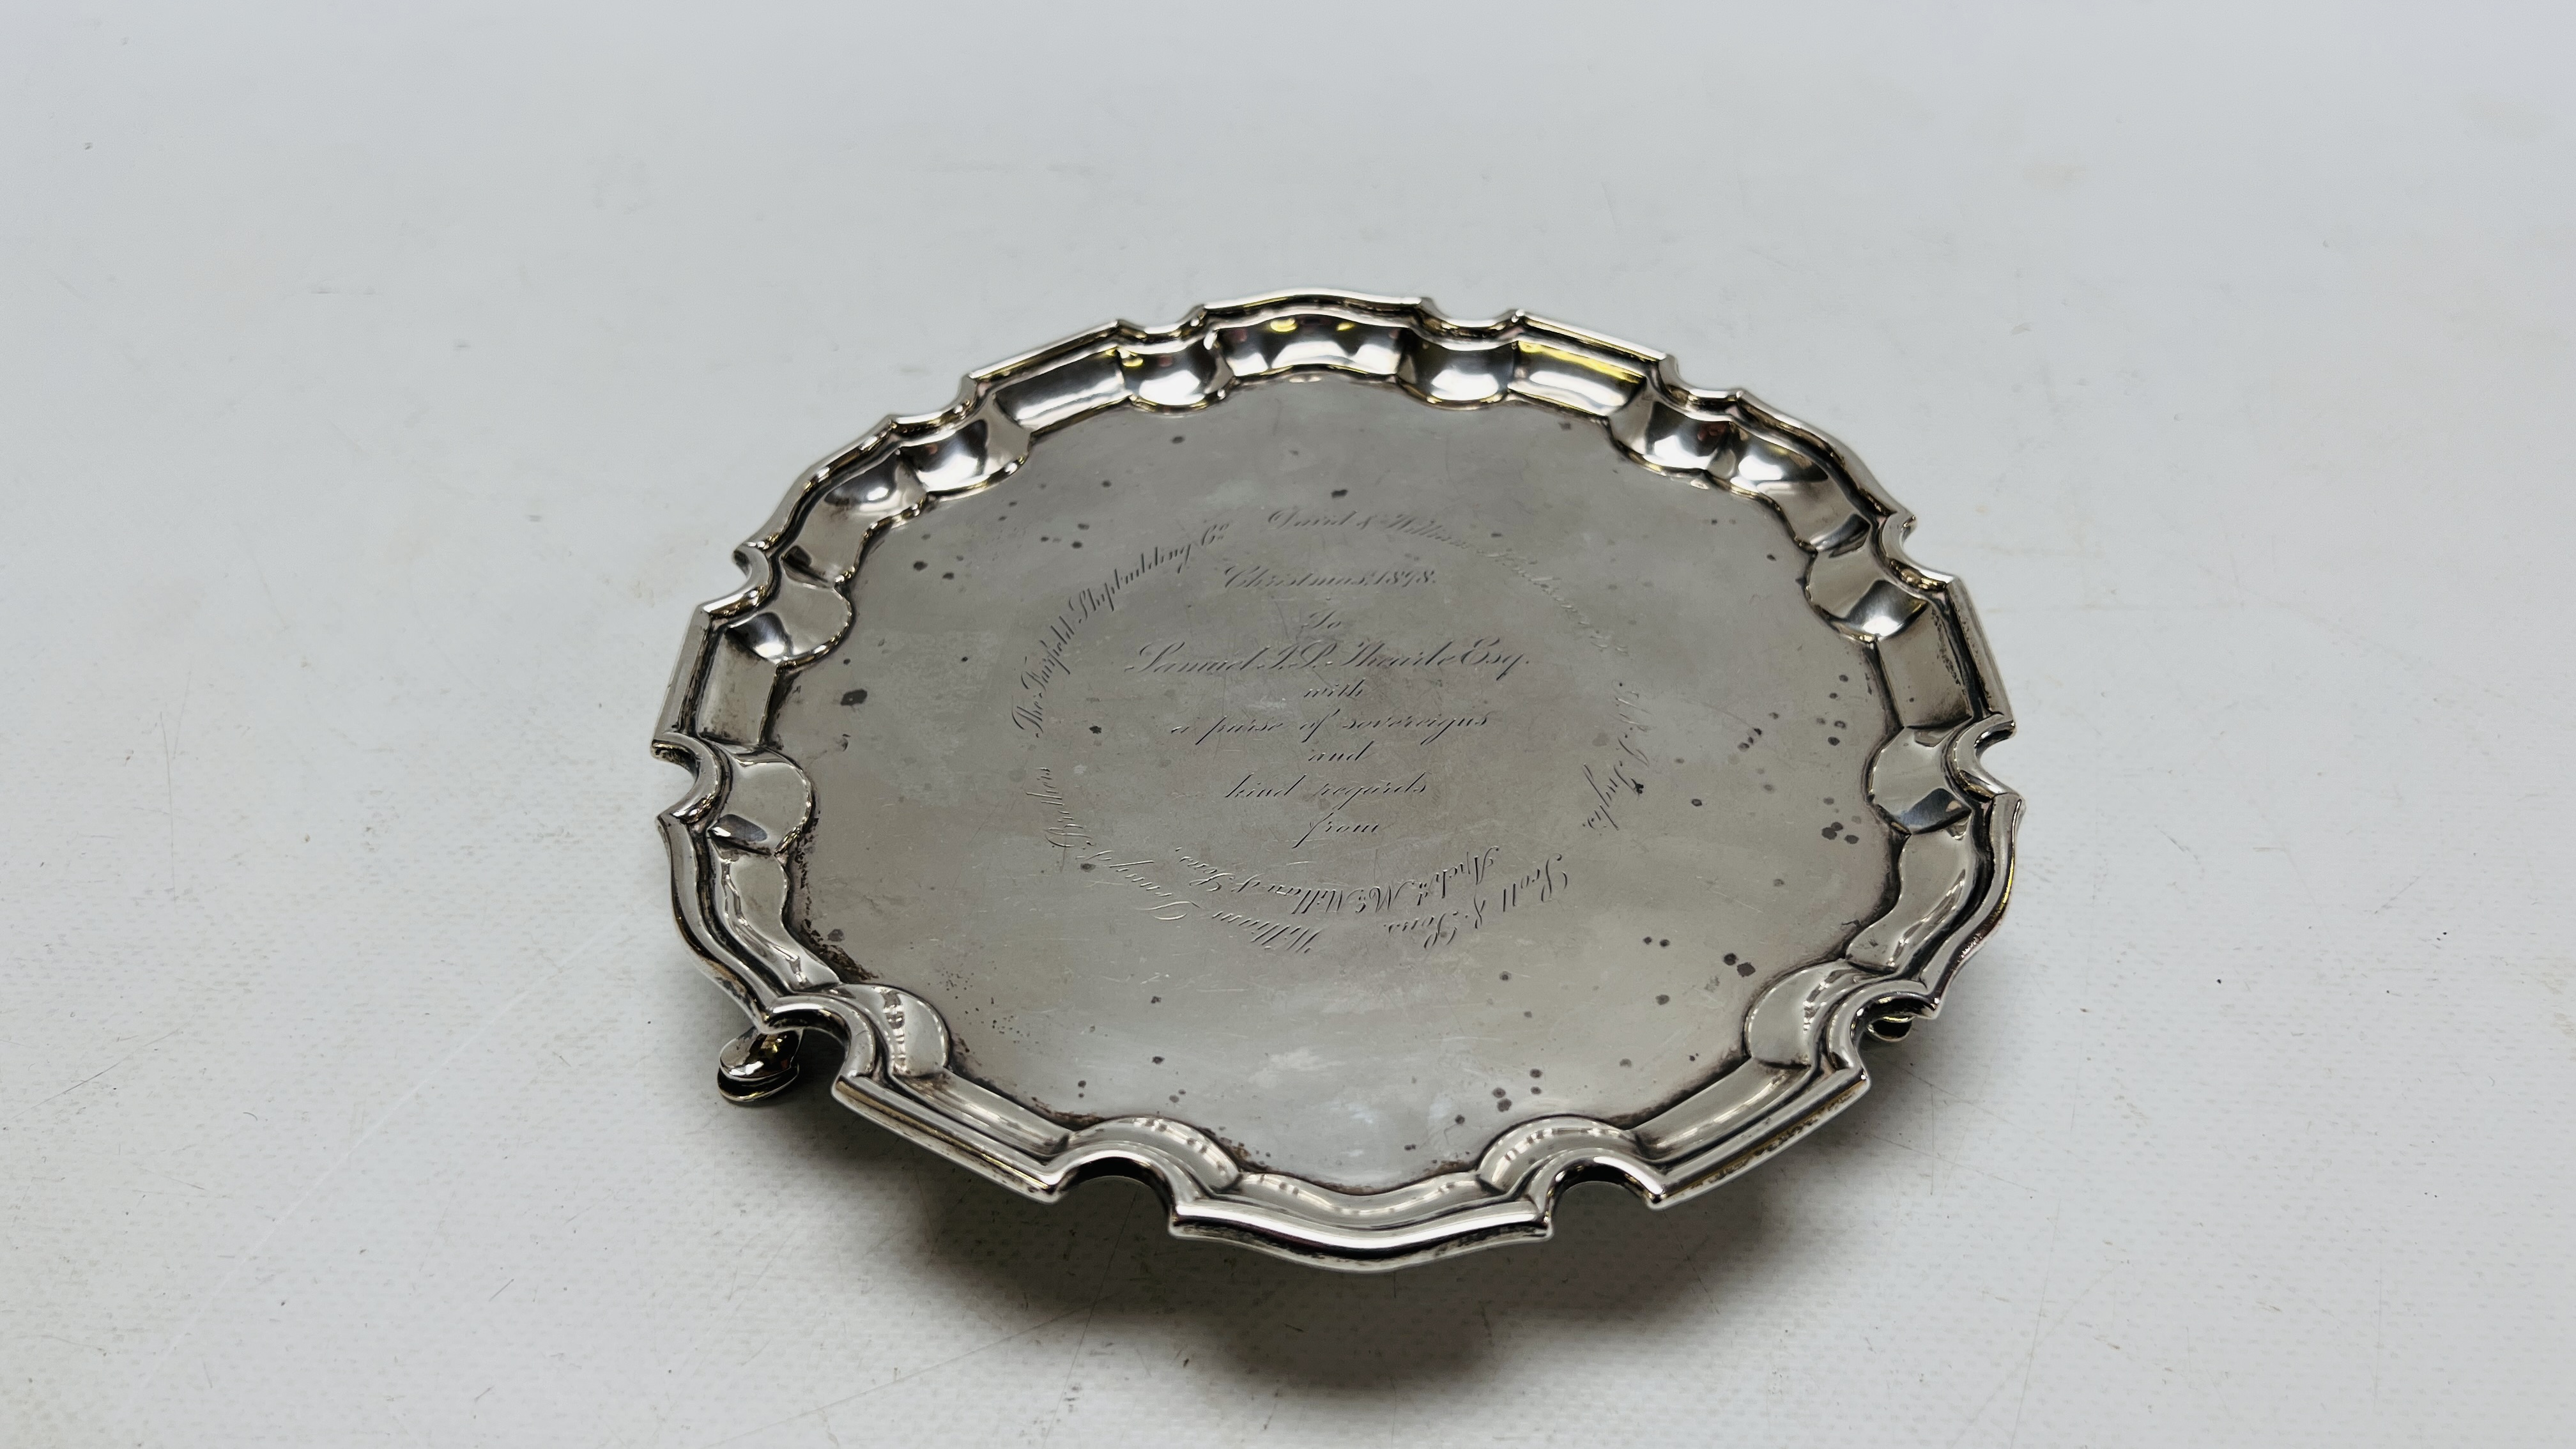 AN ANTIQUE SILVER SALVER GIFTED TO SAMUEL JAMES POPE THEARLE CHRISTMAS 1898, INSCRIBED.